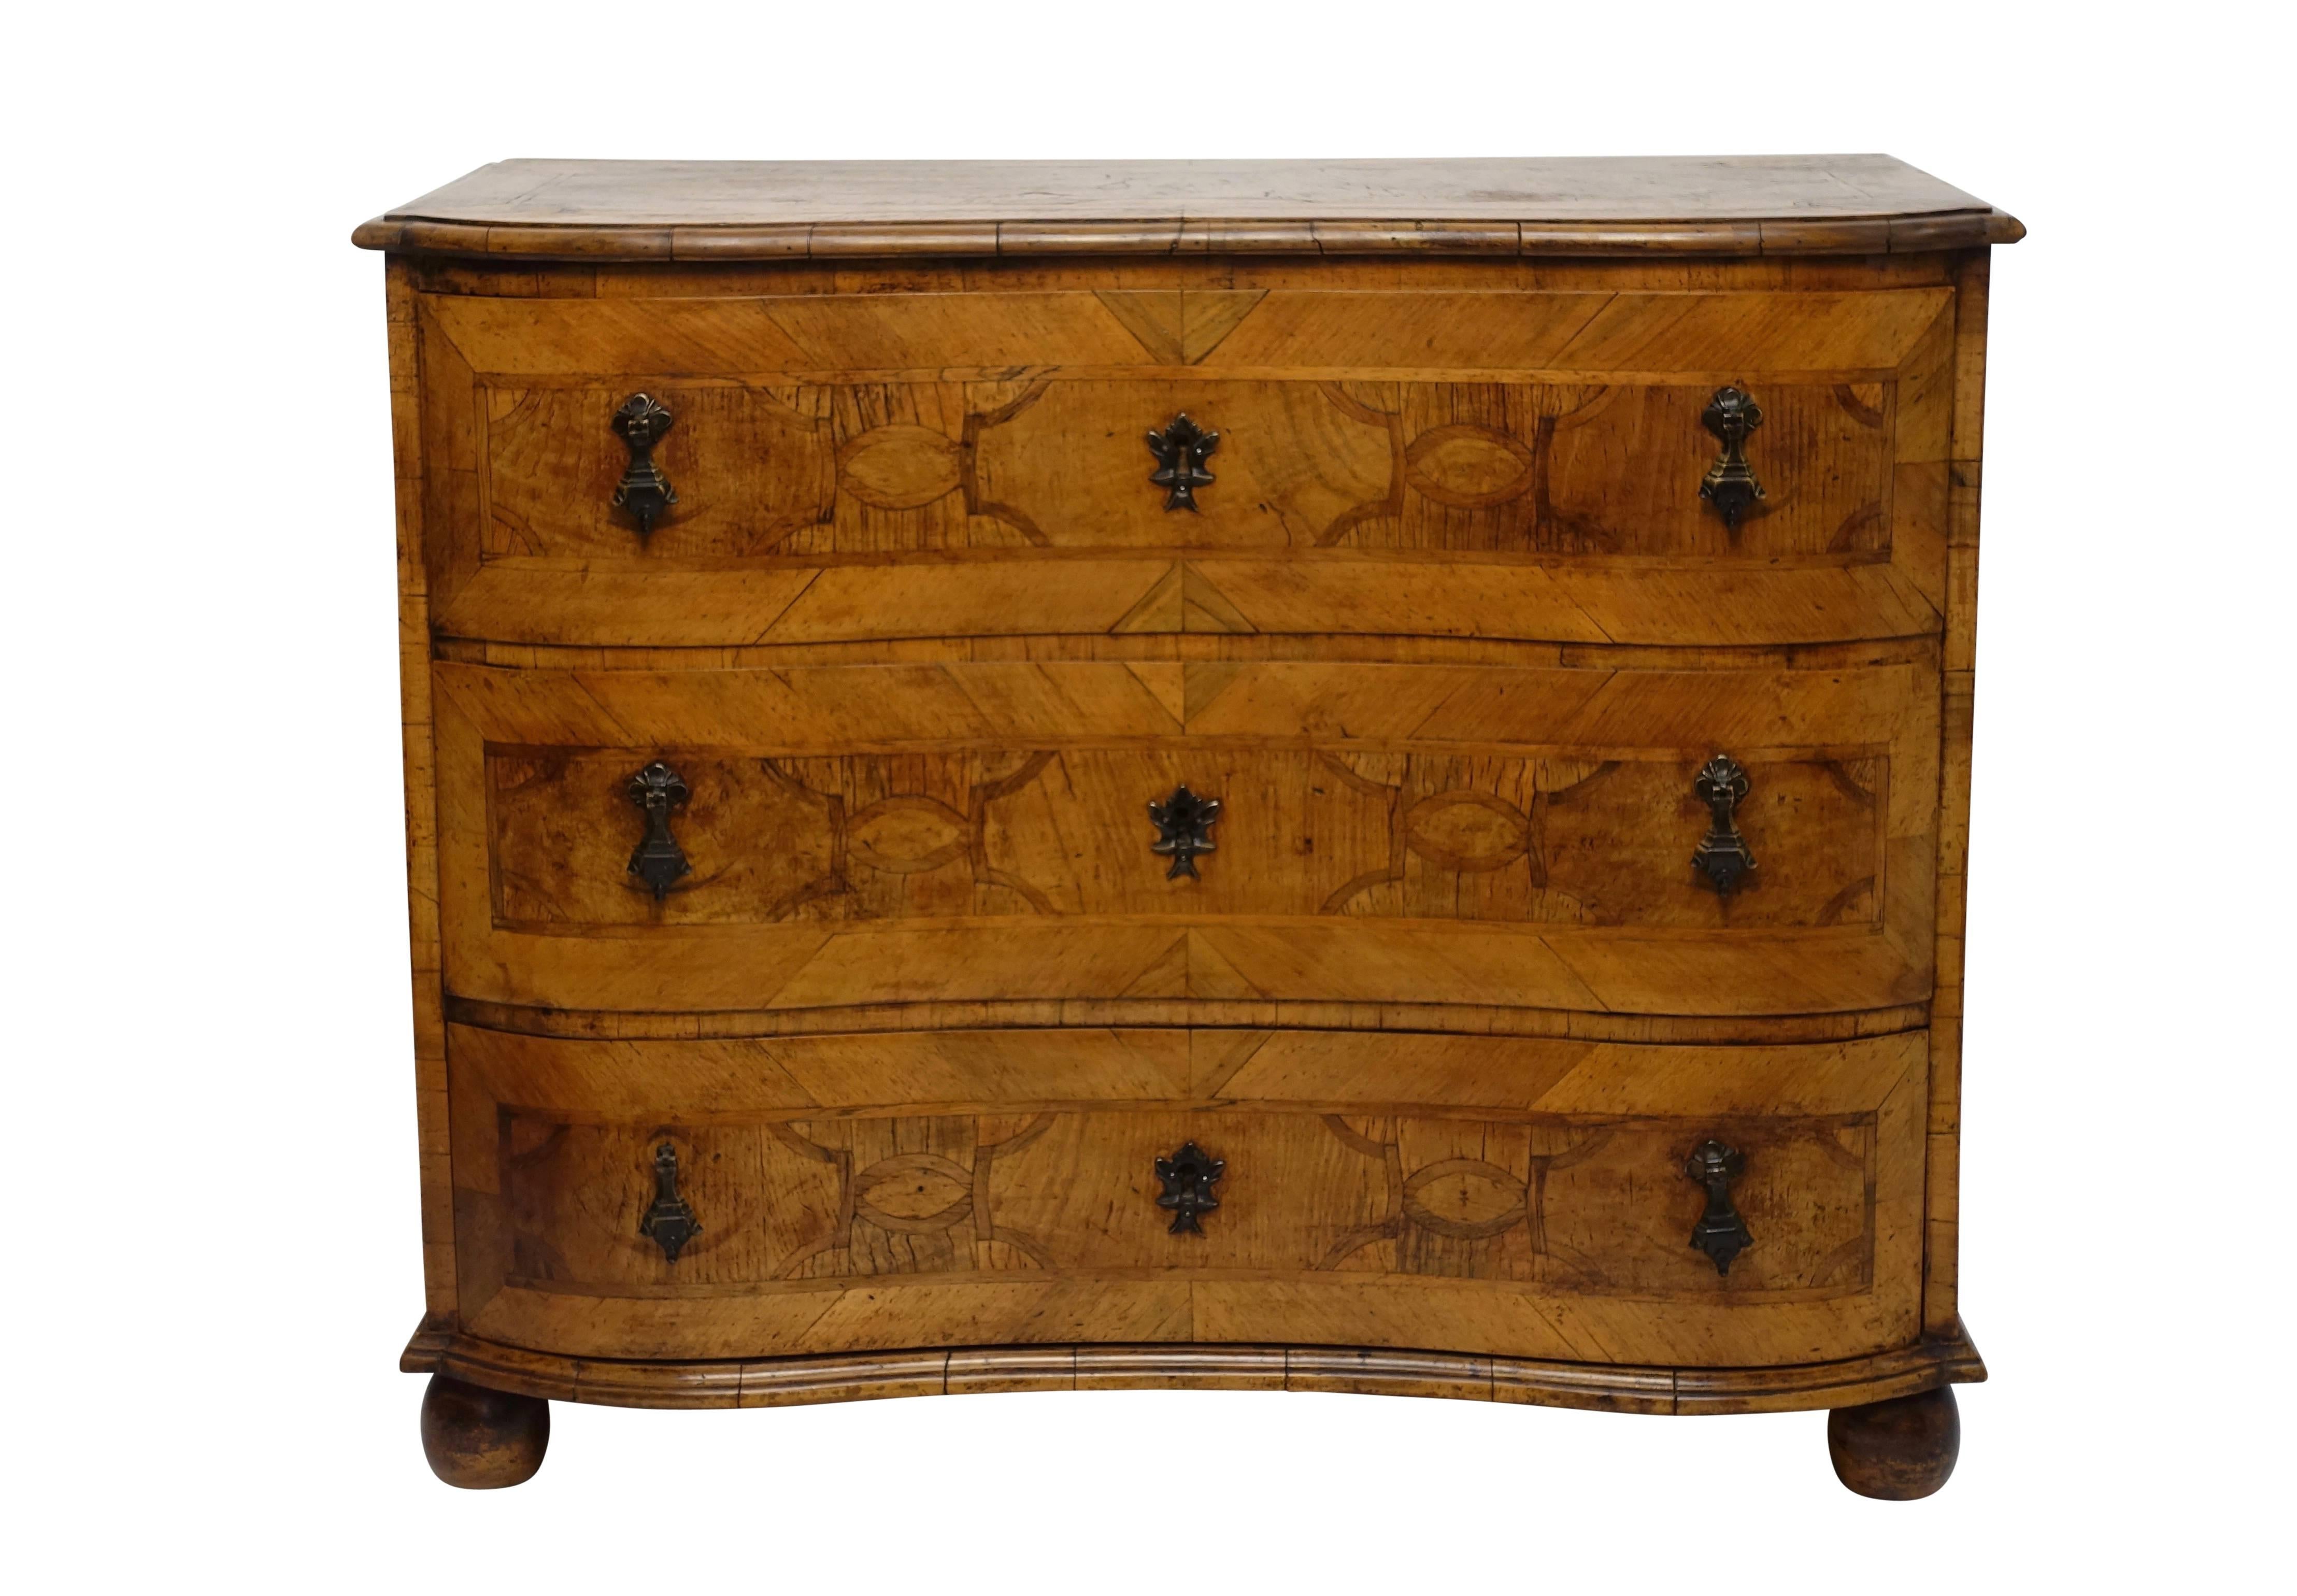 A fine and beautifully made serpentine shape walnut three-drawer commode or chest of drawers with olivewood inlay. Geometric pattern inlay on the sides, top and drawer fronts, and having patinated brass pulls, sitting on bun feet, Italian, early to